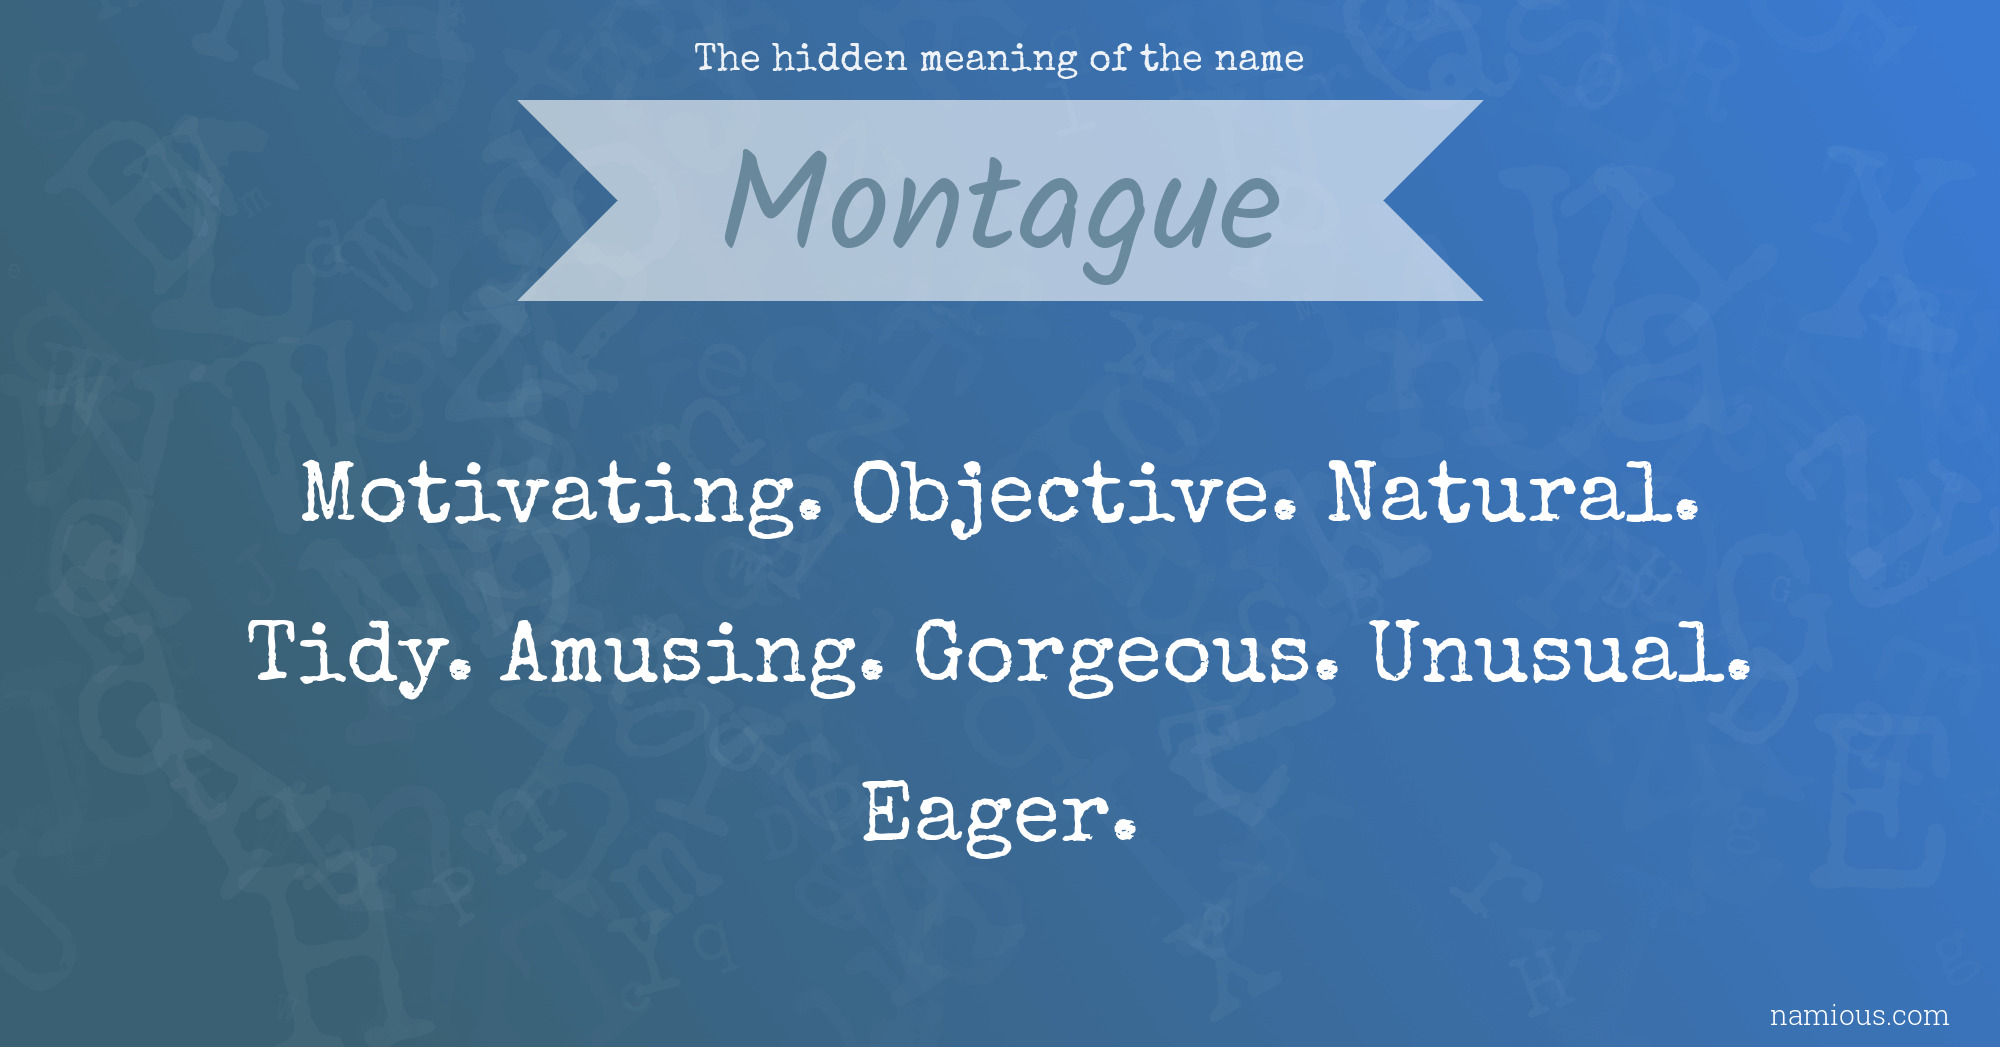 The hidden meaning of the name Montague